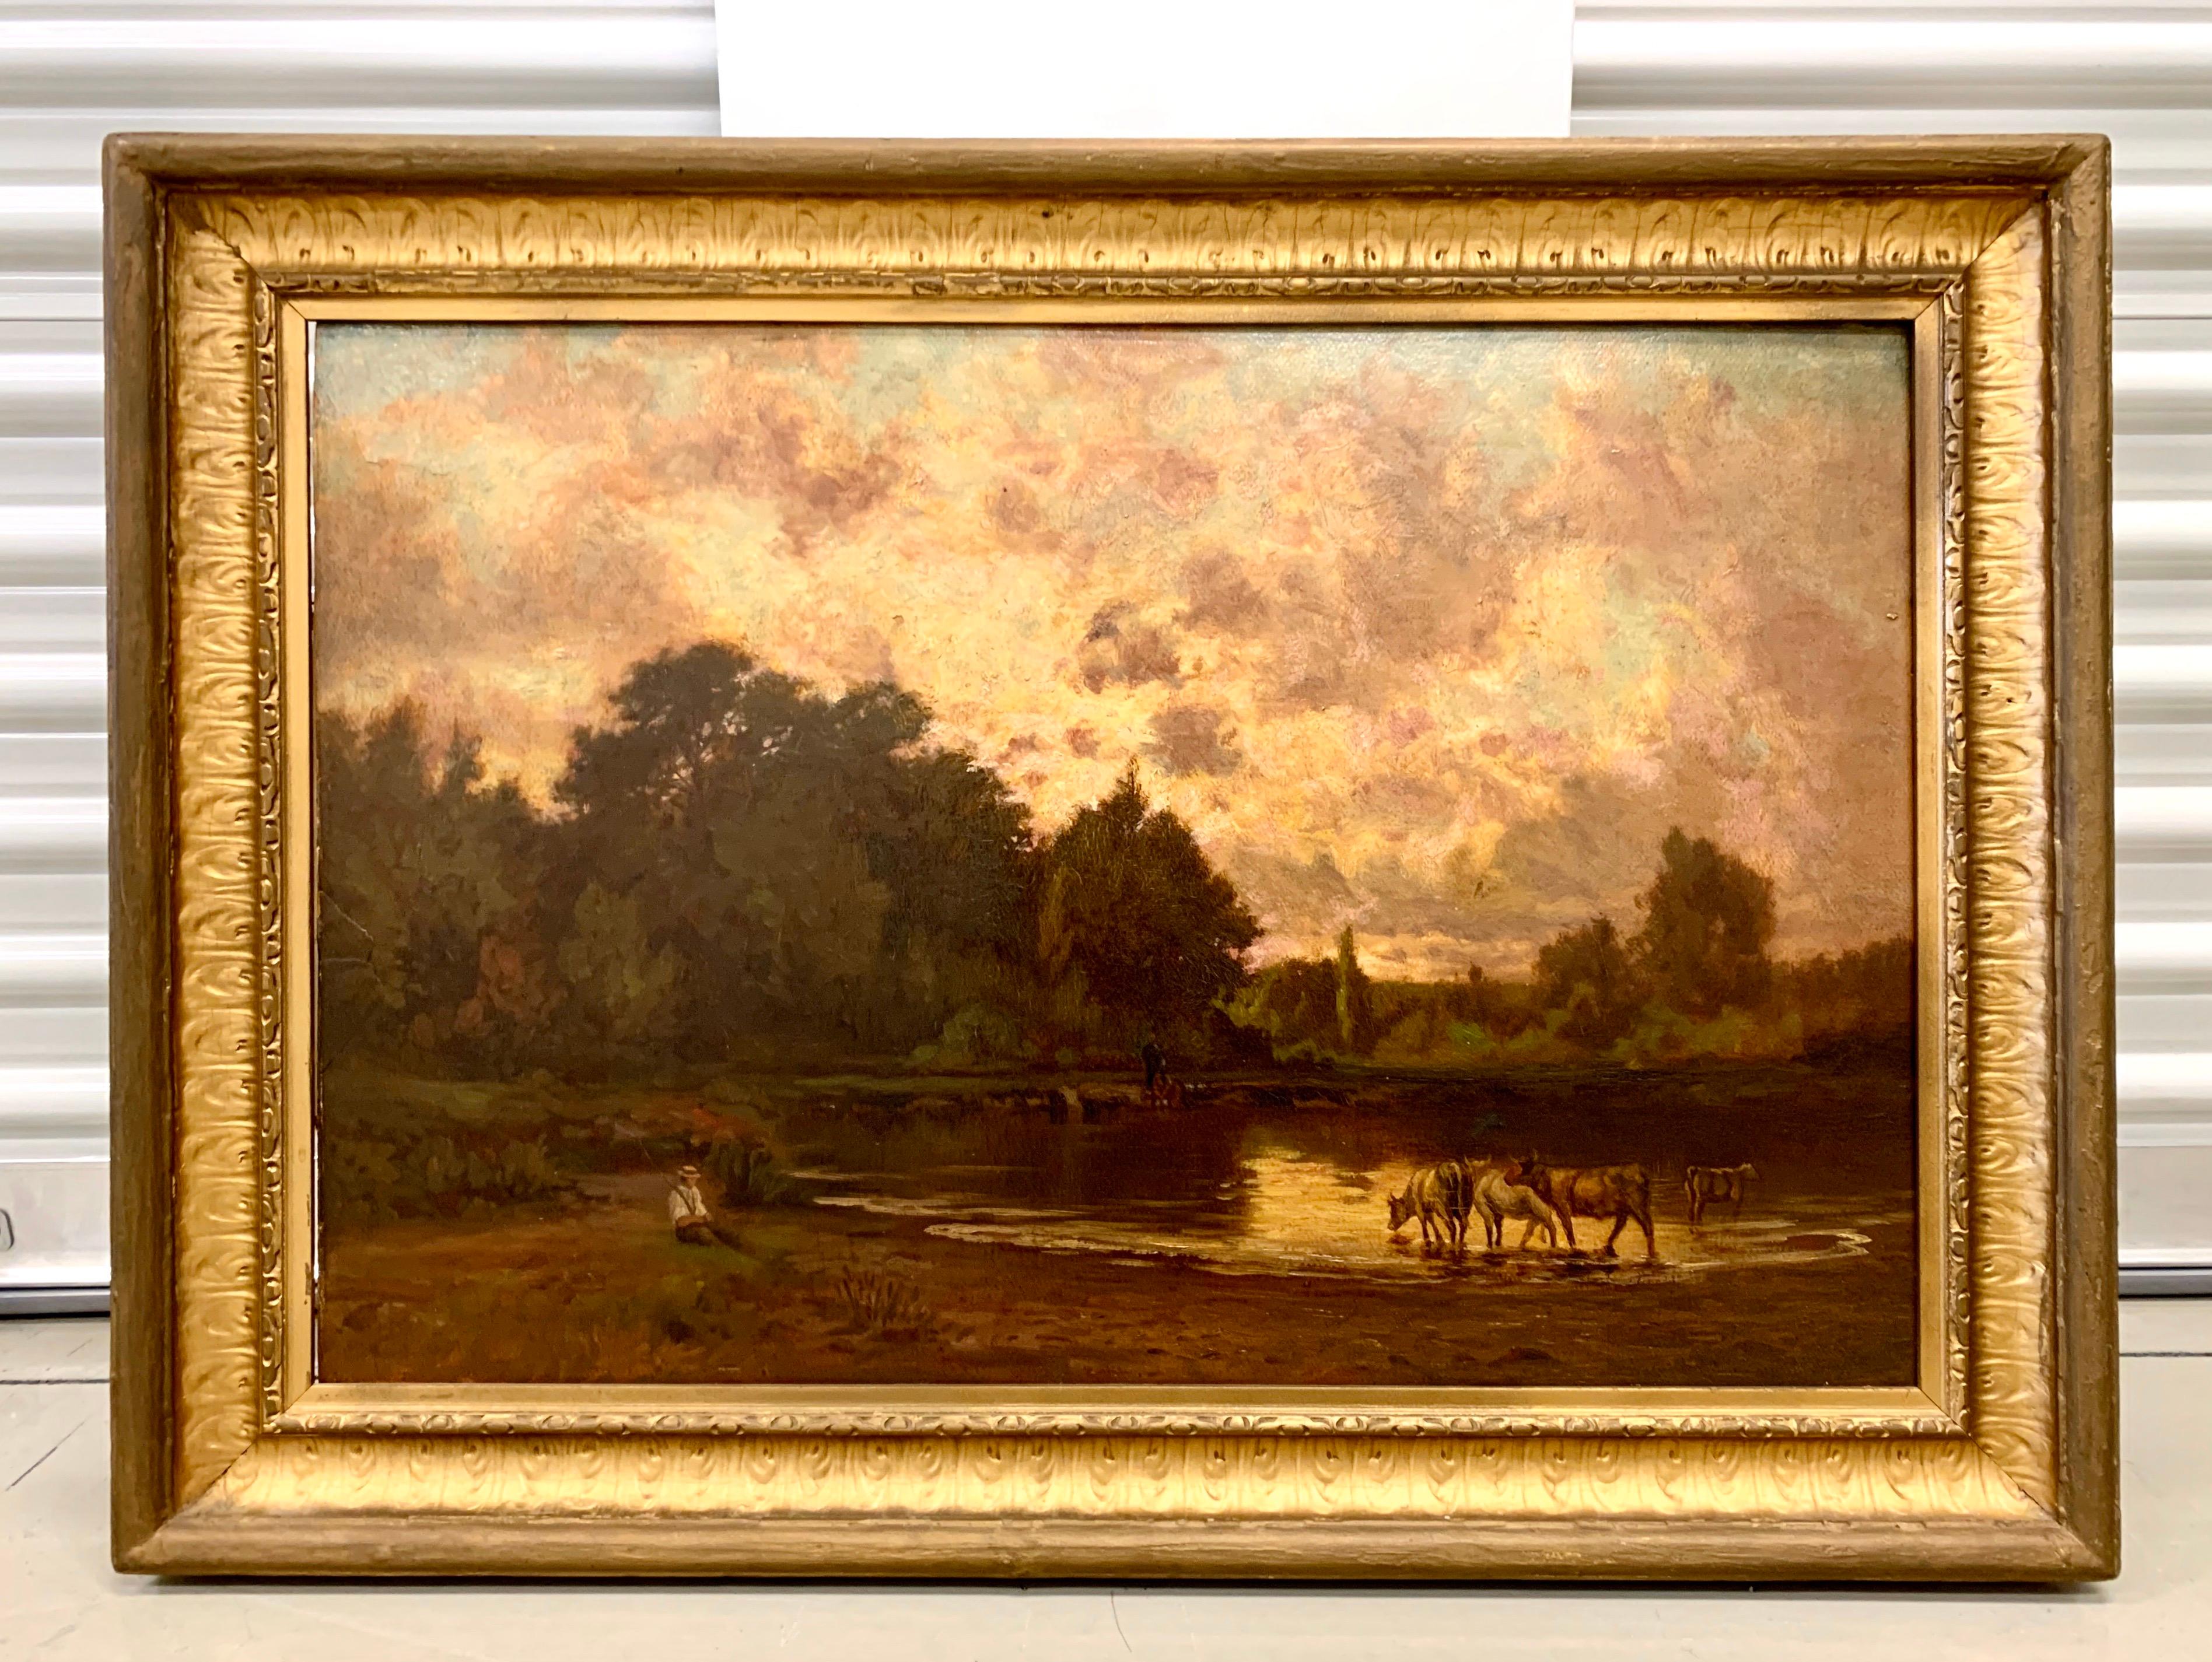 Beautiful pastoral landscape oil painting with cows on a river beneath a purple sky. Oil on board. Signed on back along with provenance. Displayed in a gold giltwood frame, late 19th century.